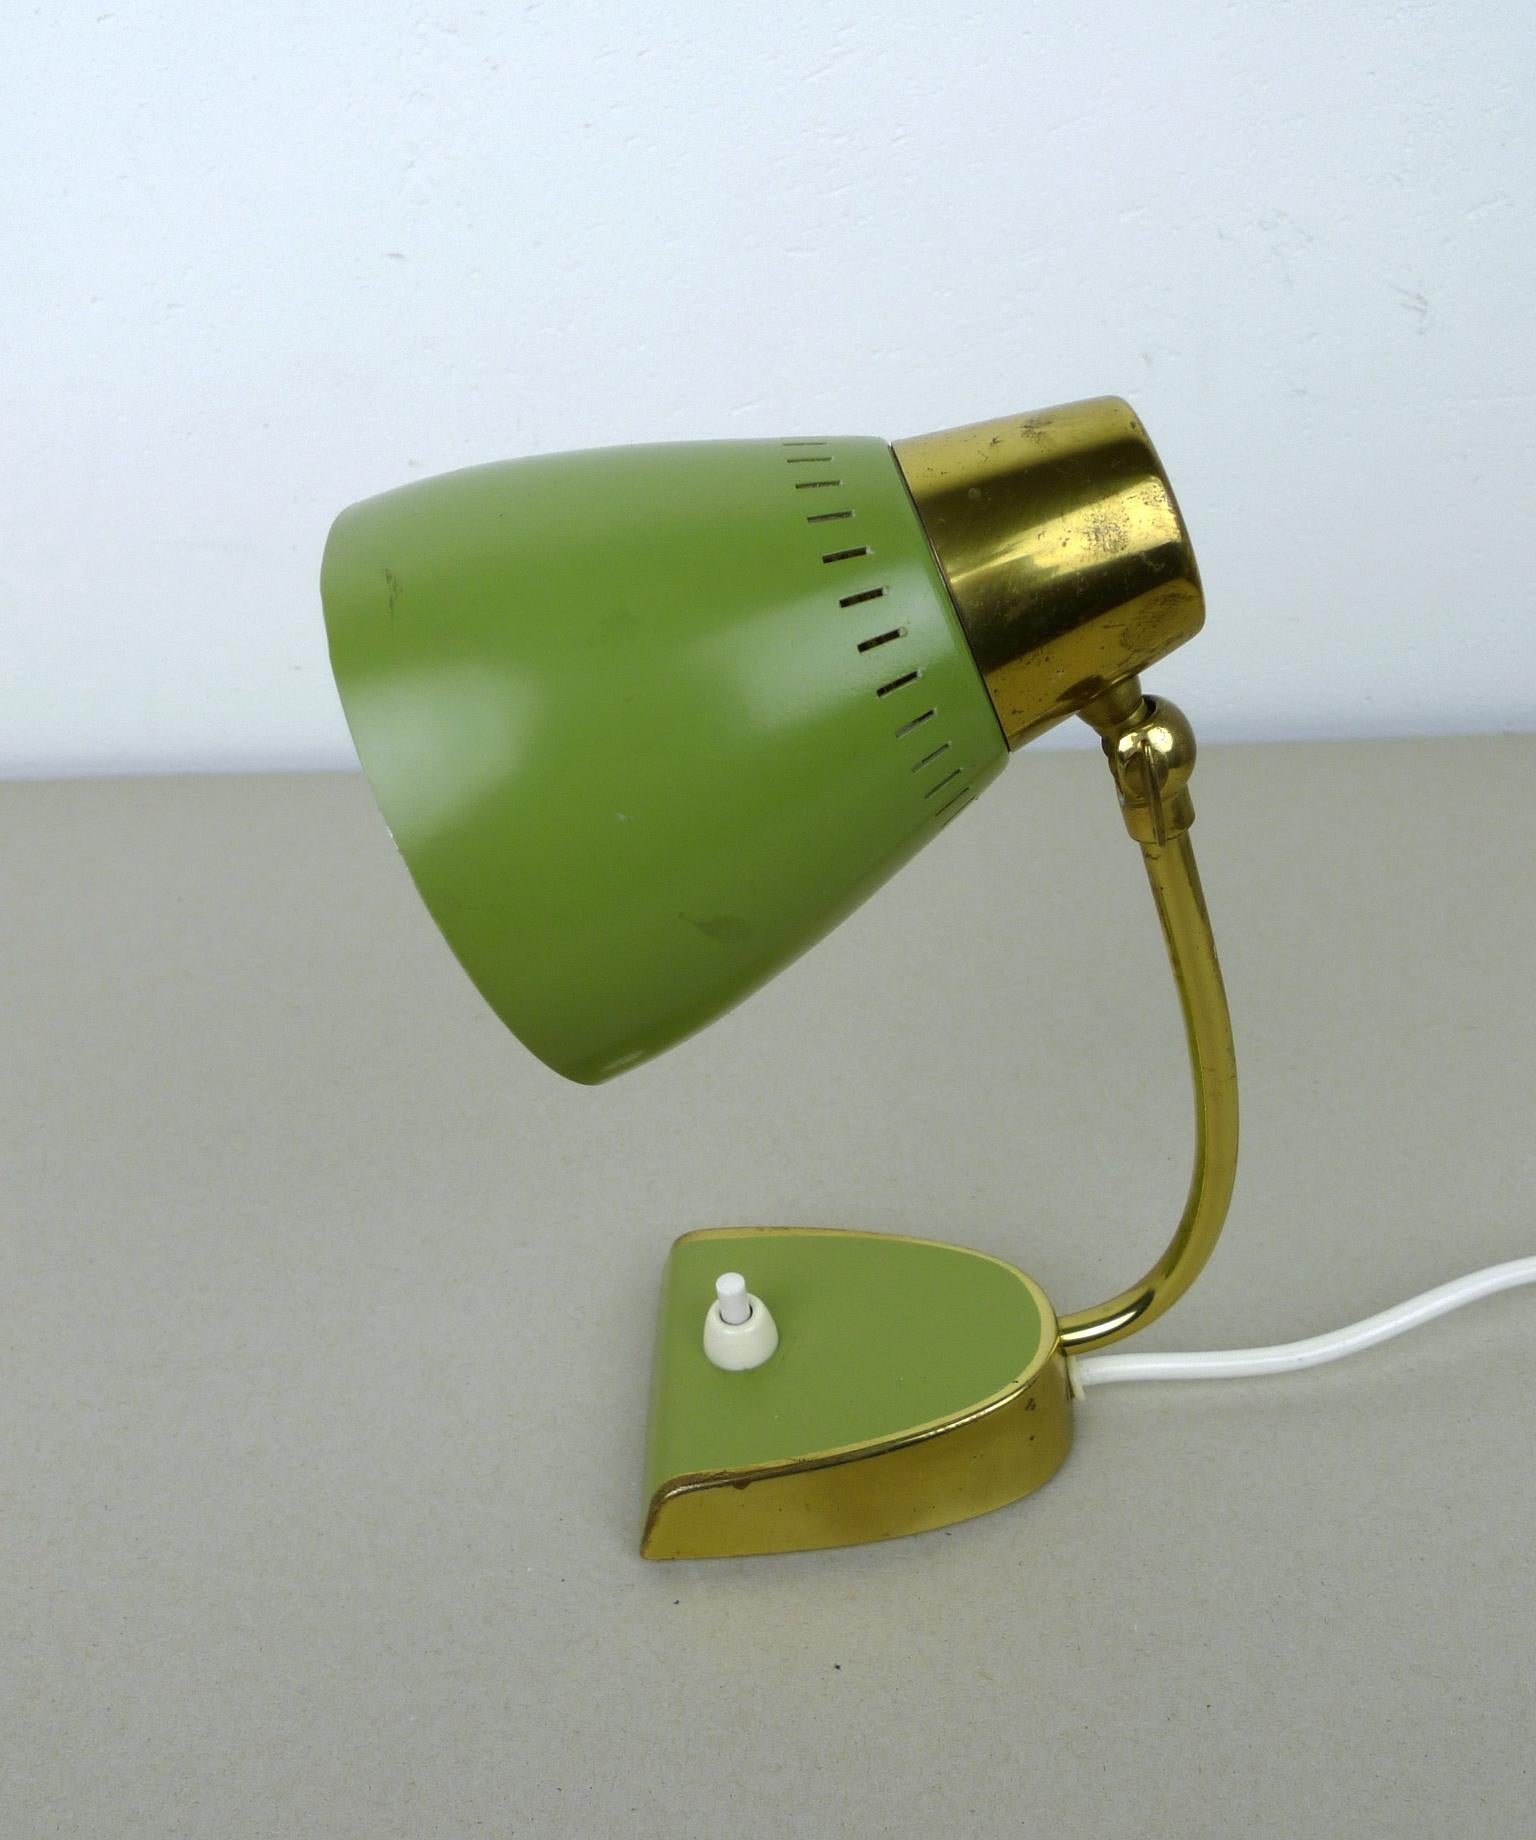 Small green bedside lamp from the 1950s with brass elements and a pressure switch on the Stand. It features an E 14 lamp socket and it is in good vintage condition.